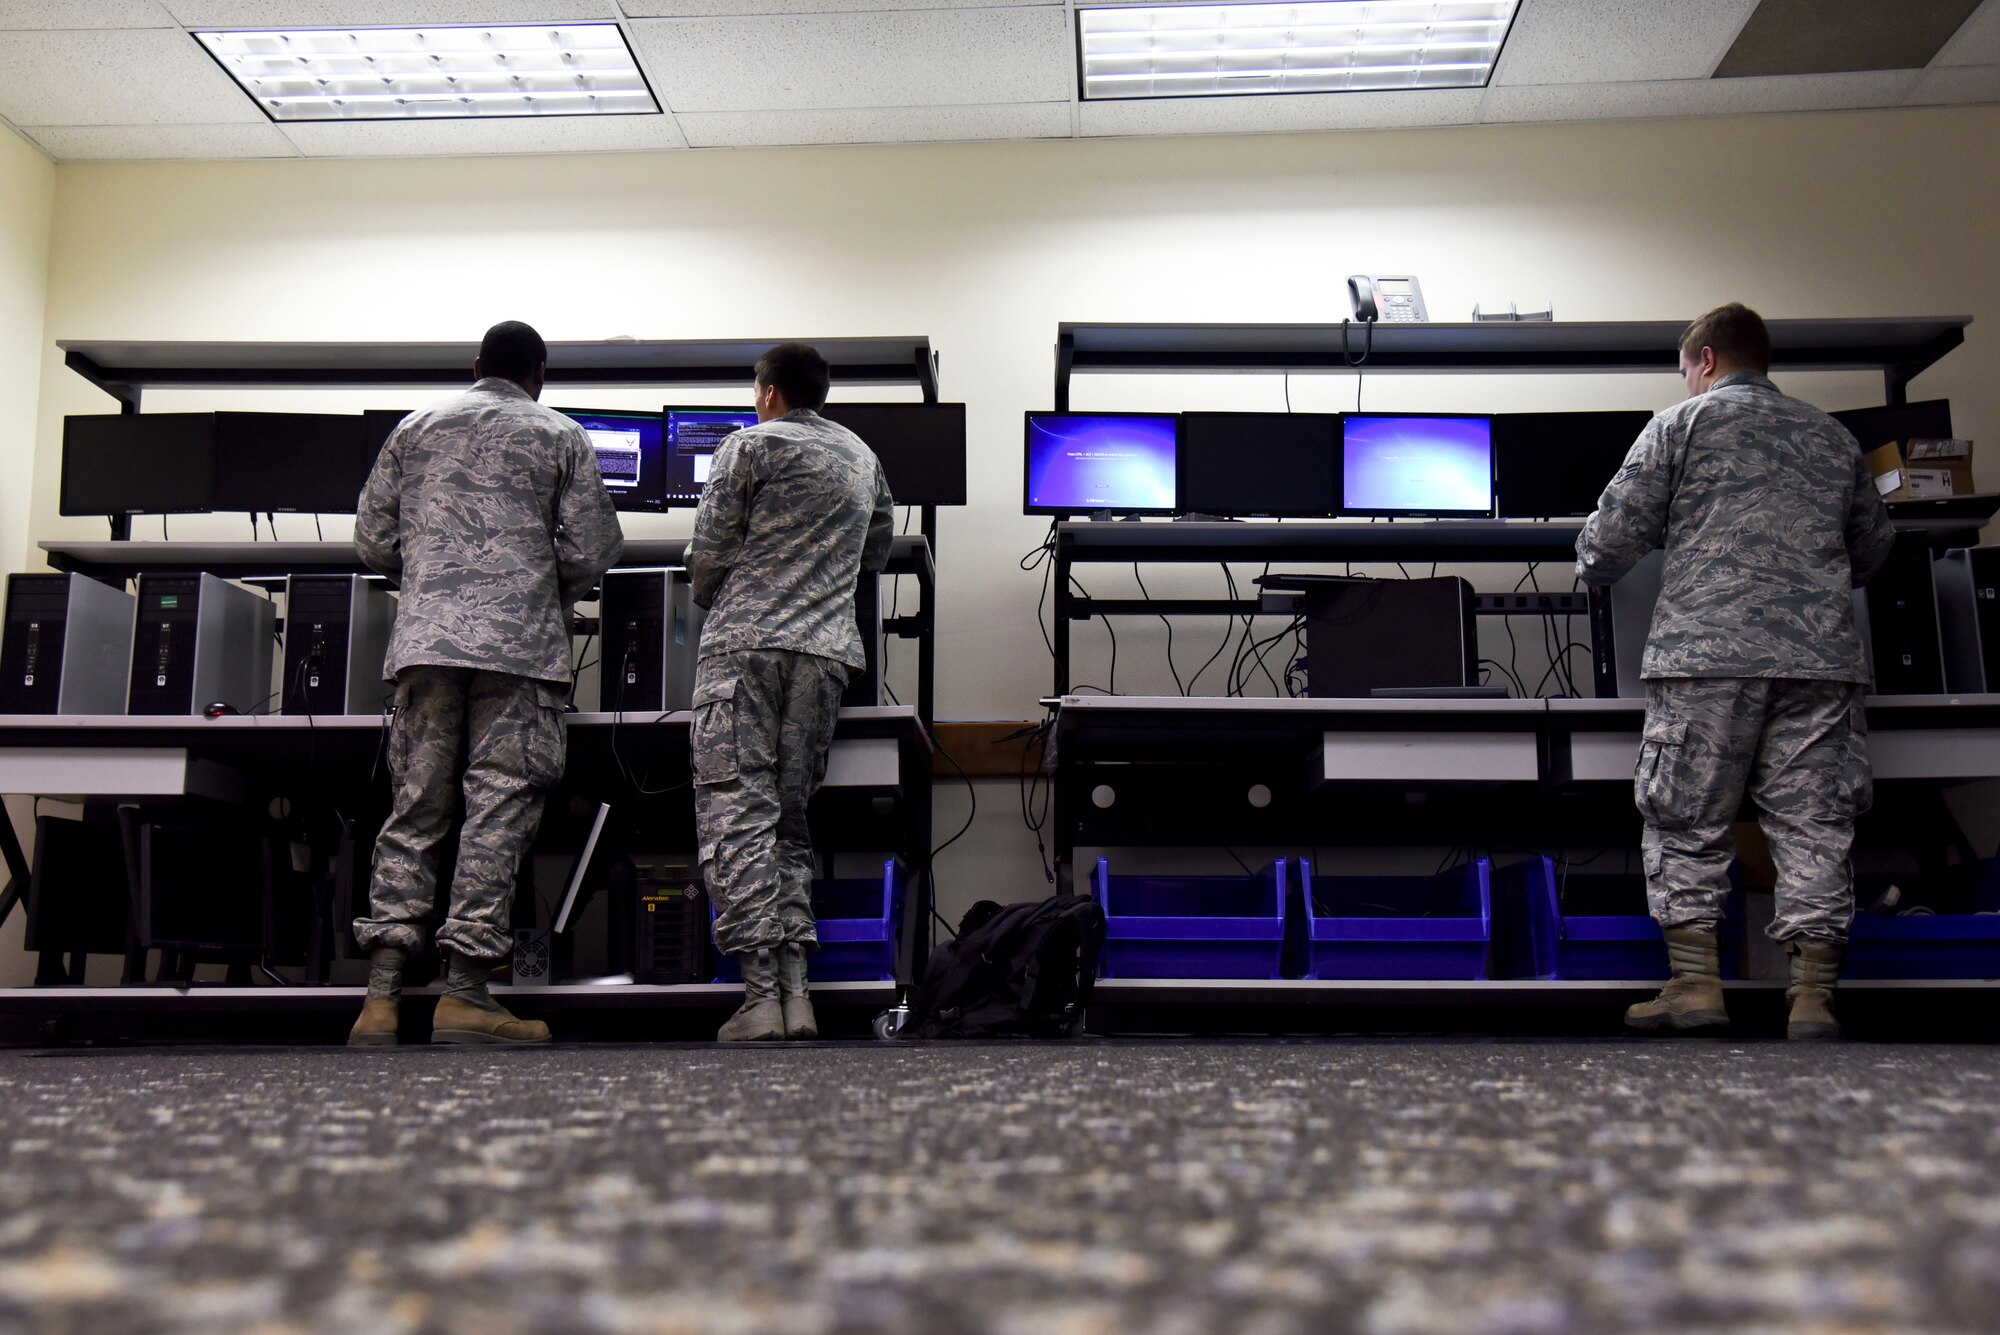 Airmen from the 92nd Communications Squadron run security patches on computers Oct. 29, 2015, at Fairchild Air Force Base, Wash. A big part of being a member of the 92nd CS is being able to provide the resources that Airmen need to accomplish their jobs and staying safe at the same time, said Senior Airman Dale Clark, 92nd CS client systems technician. (U.S. Air Force photo/Senior Airman Janelle Patiño)